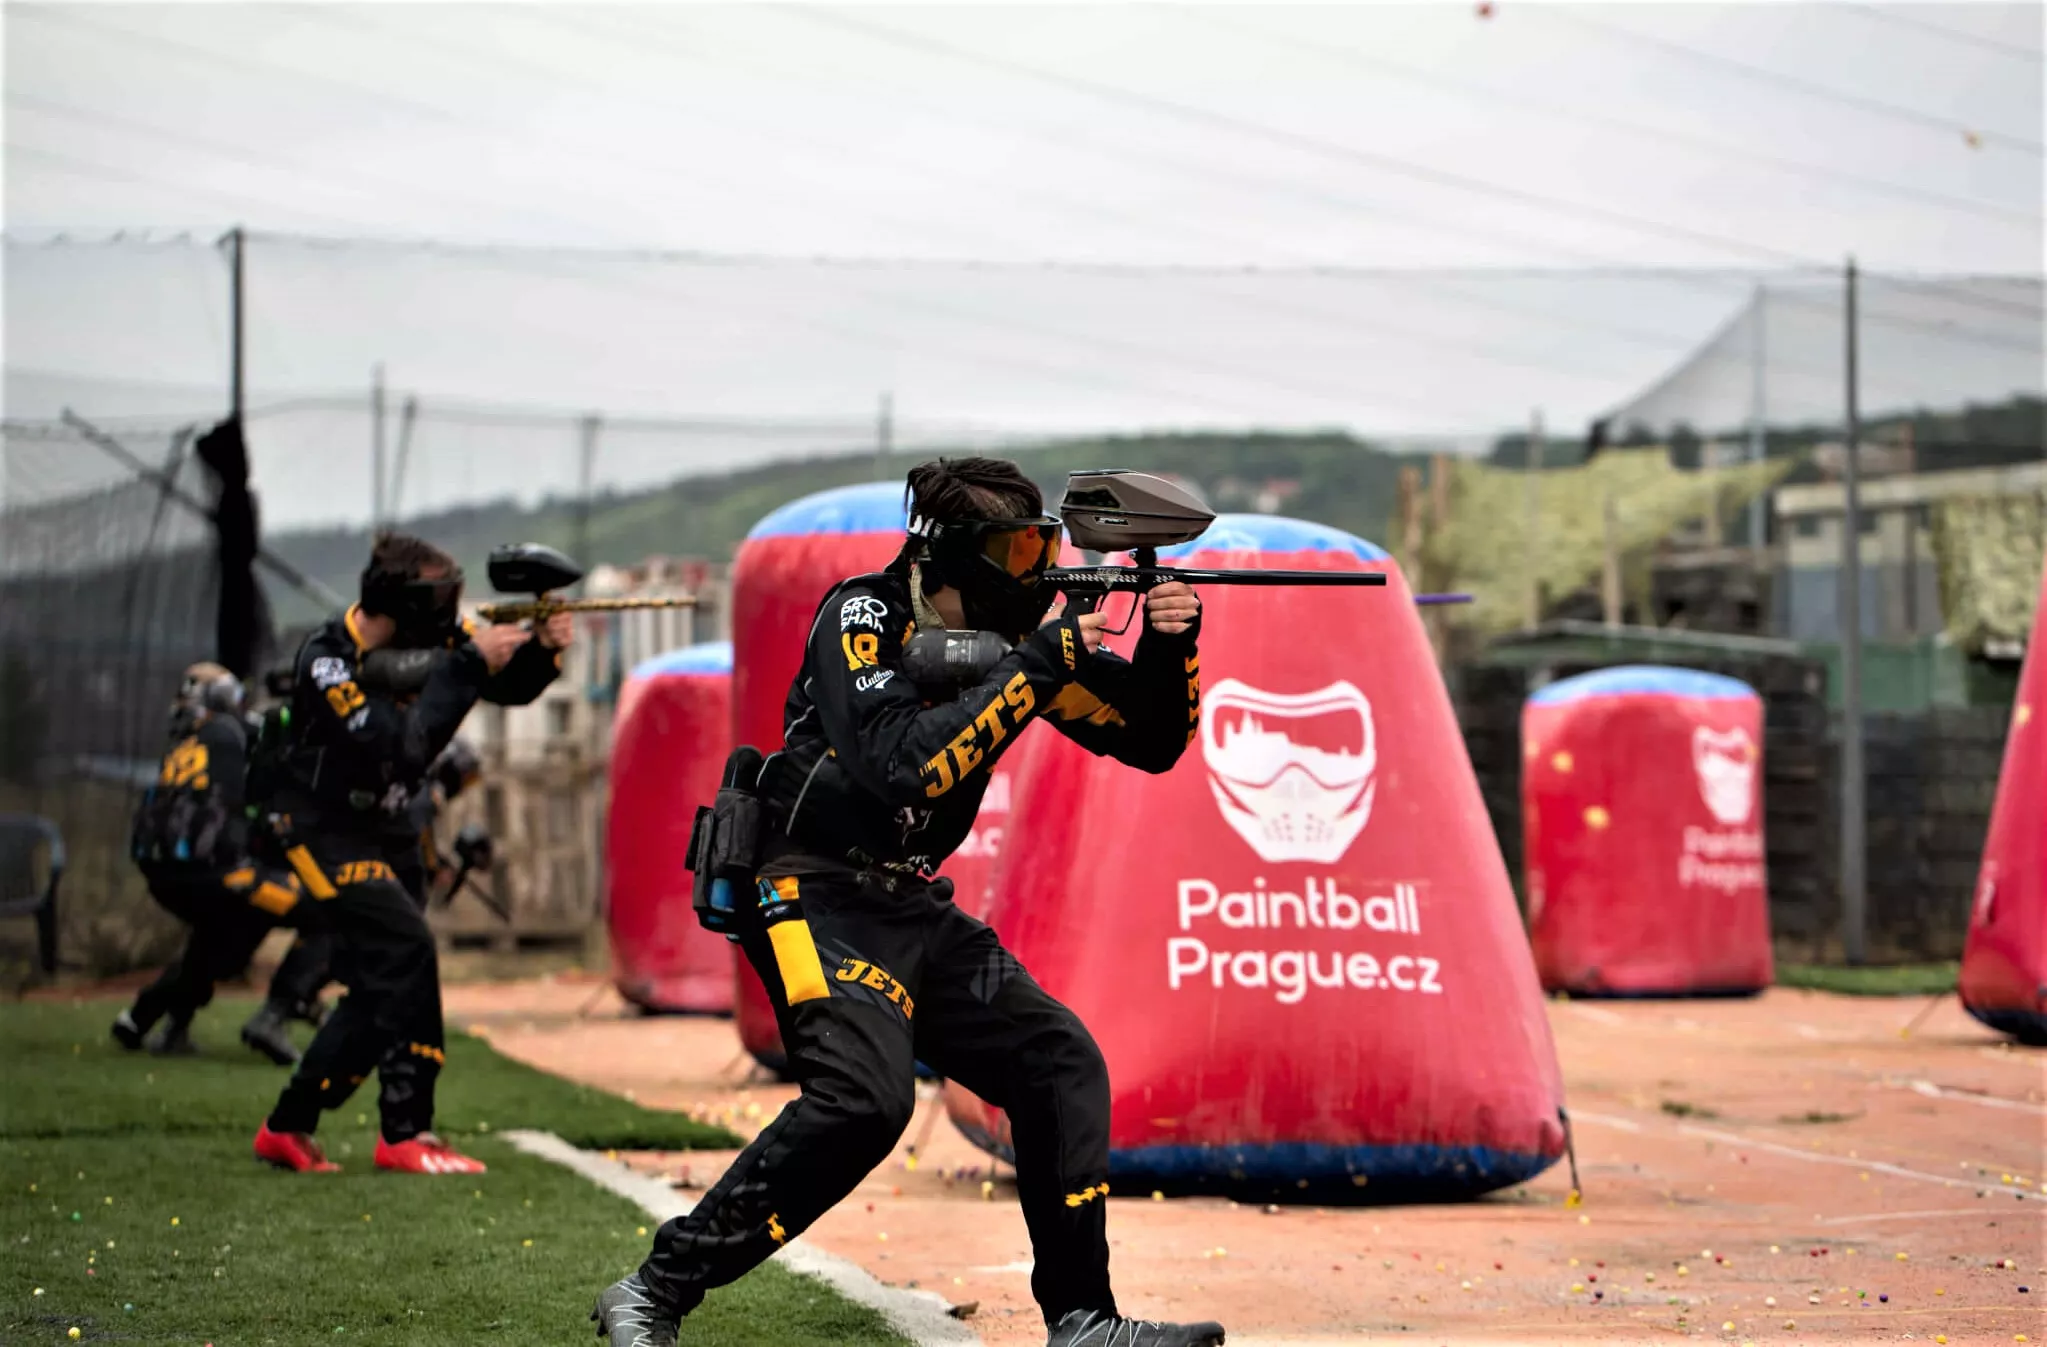 Paintball Praha in Czech Republic, Europe | Paintball - Rated 4.4